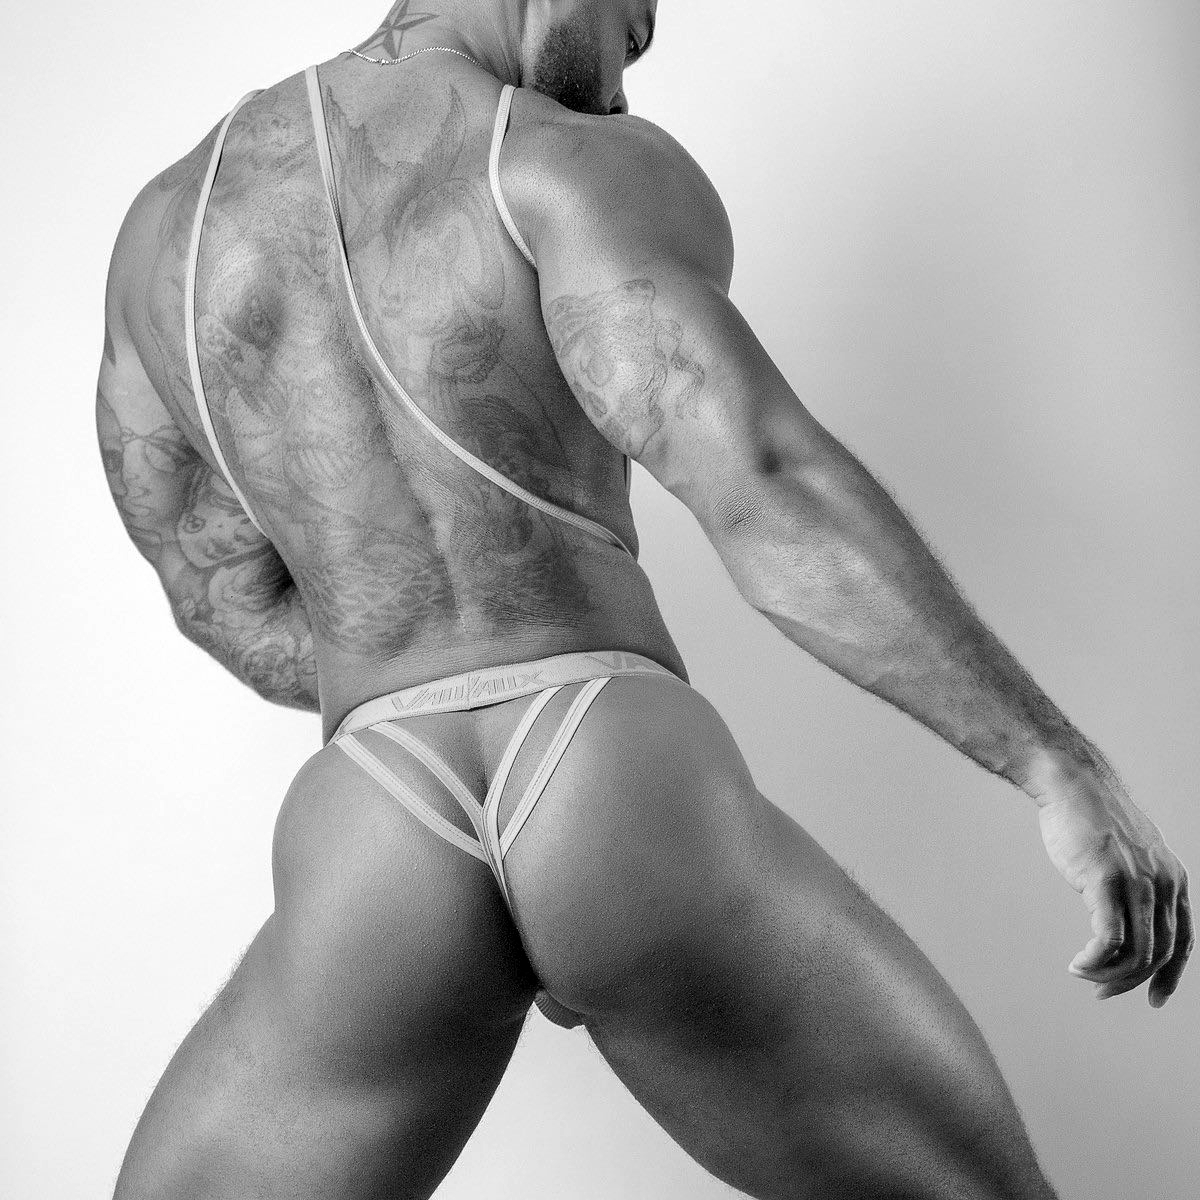 PitS and ThongS (II), by Denis Largeron Photography ft Greggory Marcus (NSFW).